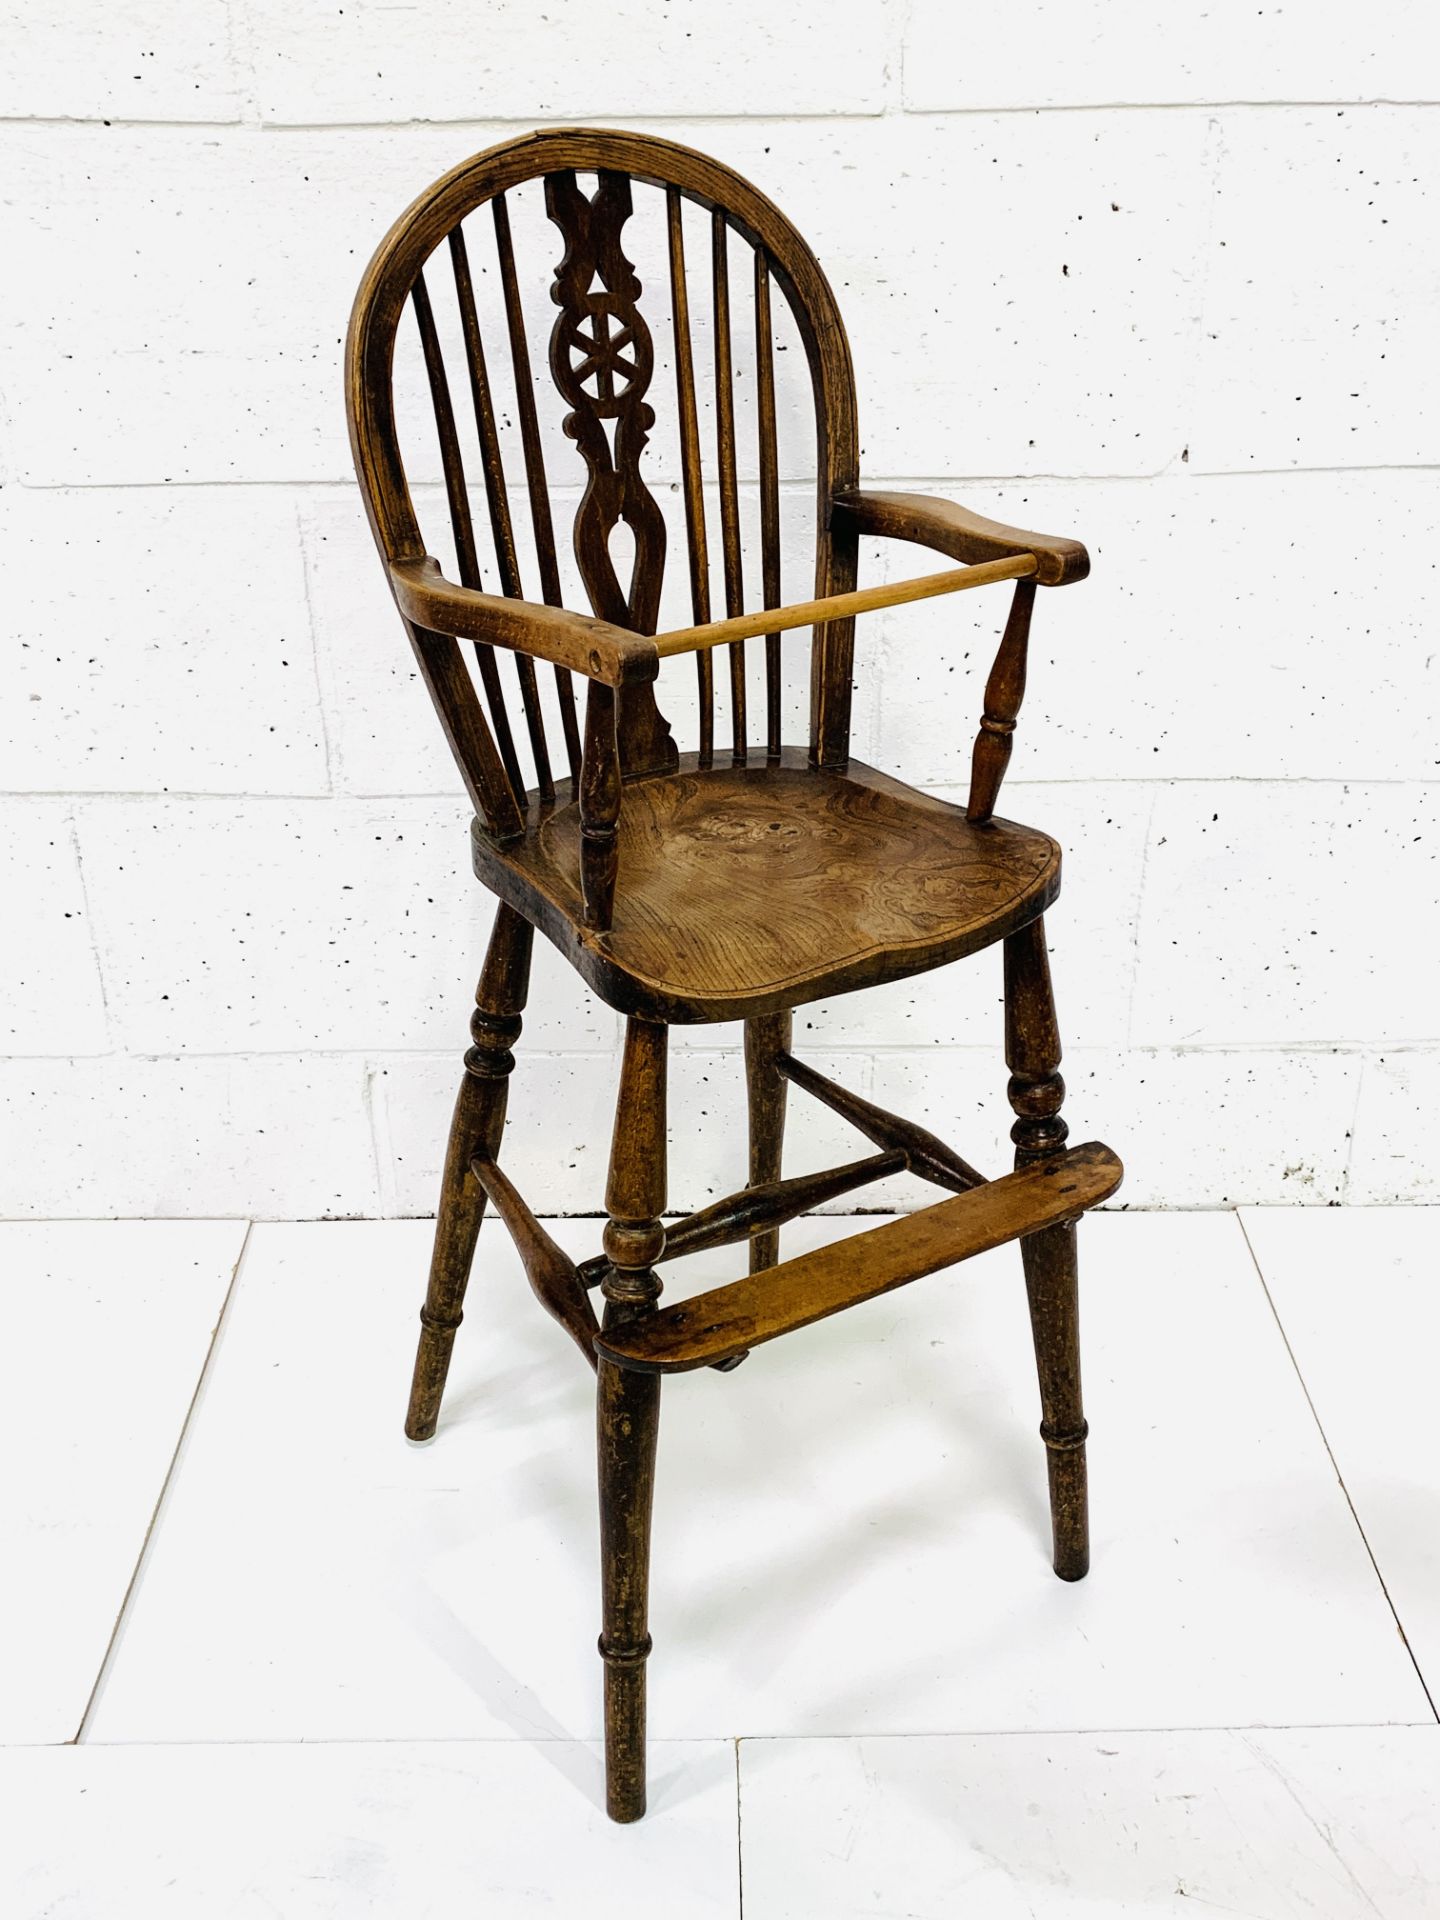 19th century Windsor style oak and elm child's high chair - Image 2 of 4